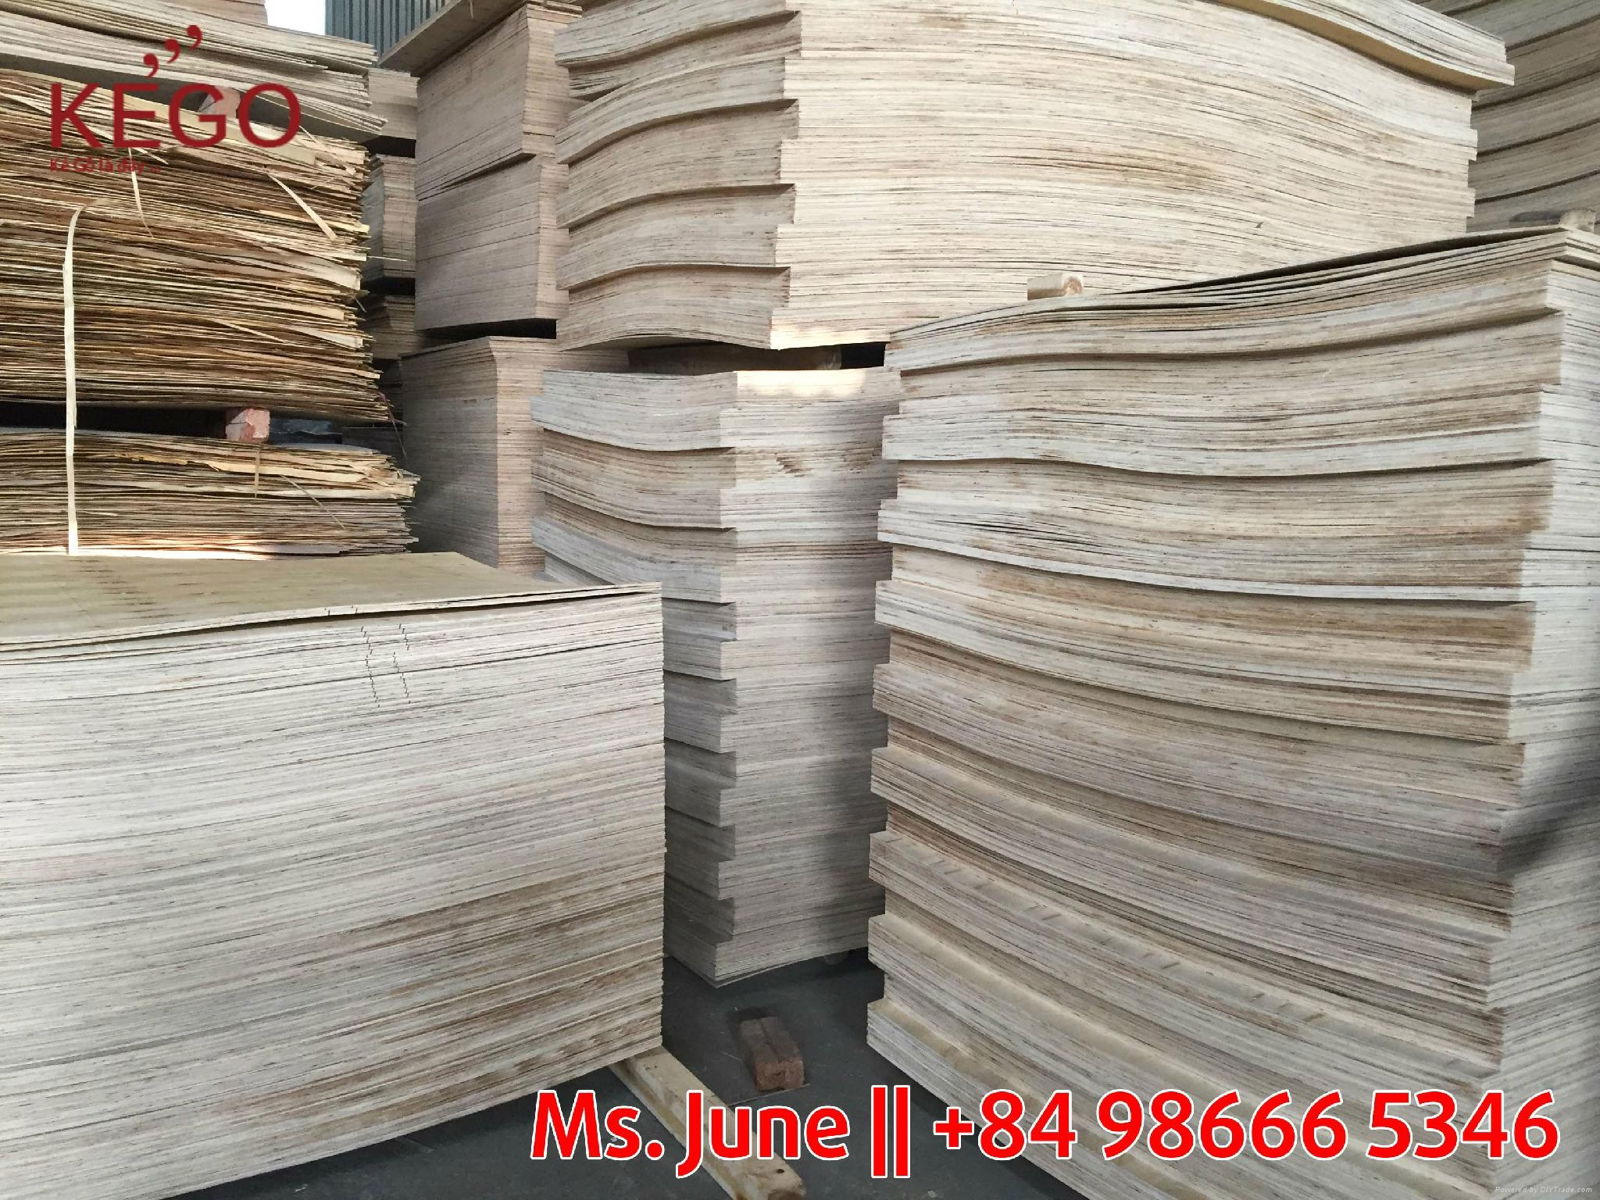 Commercial plywood - packing AB Grade from Vietnam 5